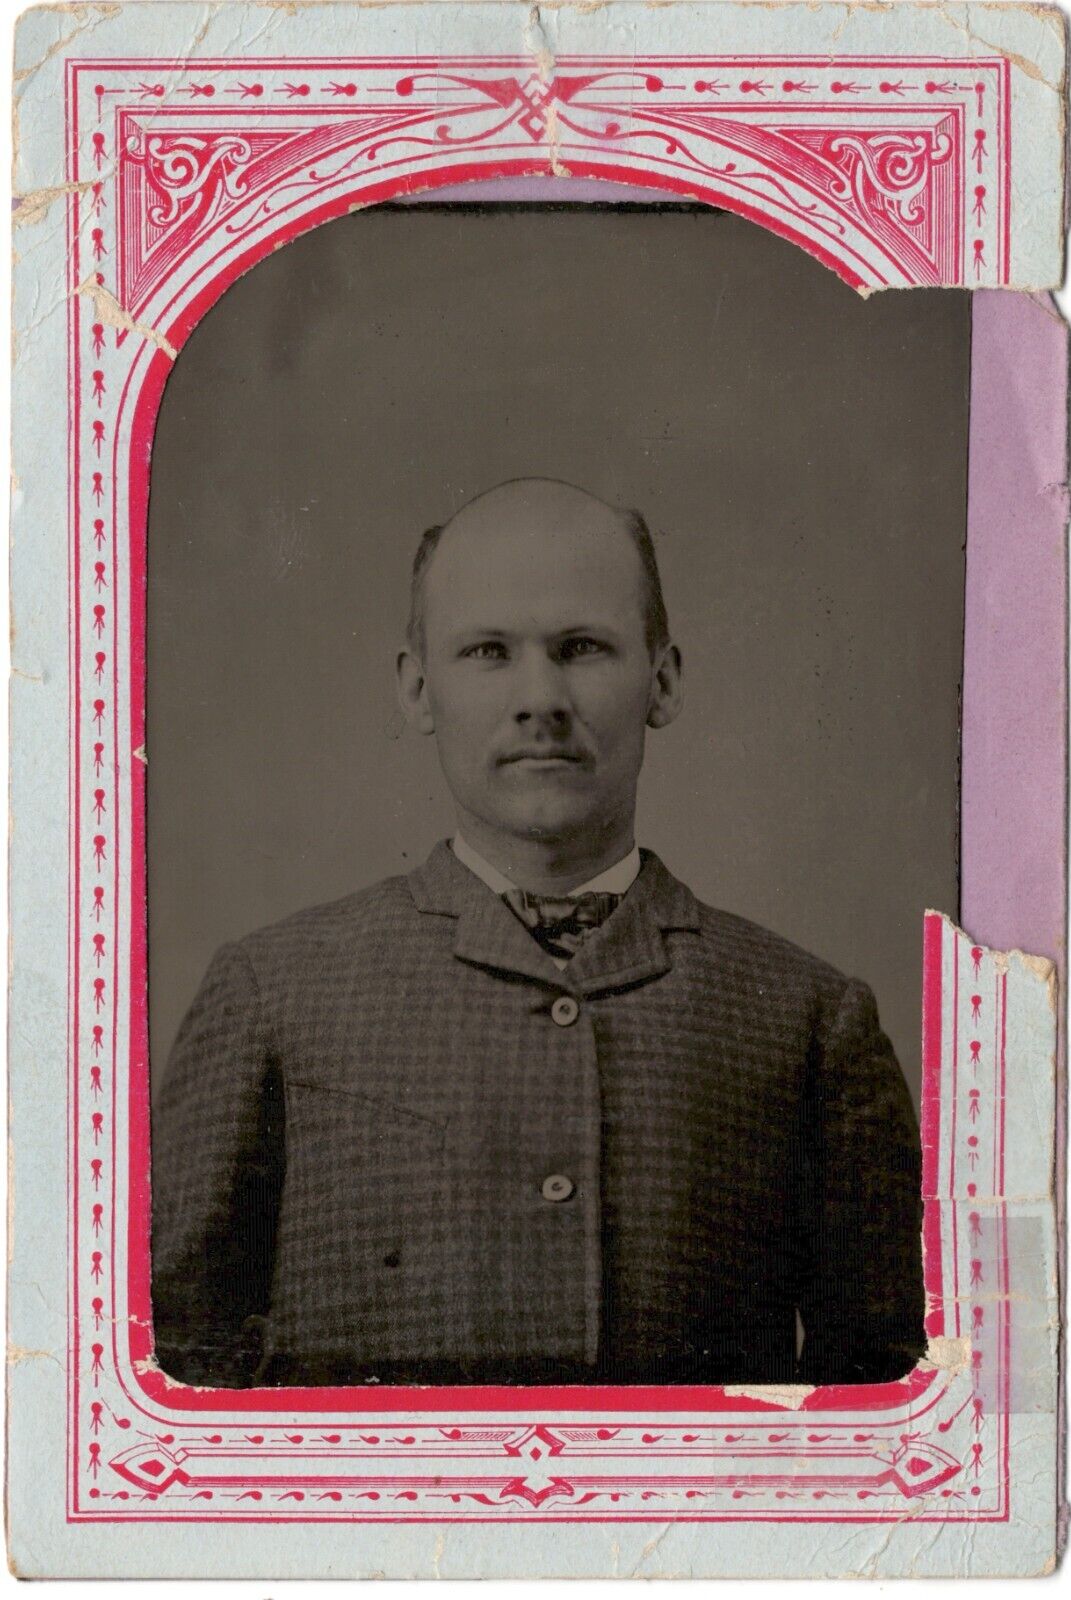 Rare Find - 1870s era Quarter Plate Tintype of Bald Man in tweed jacket and tie.